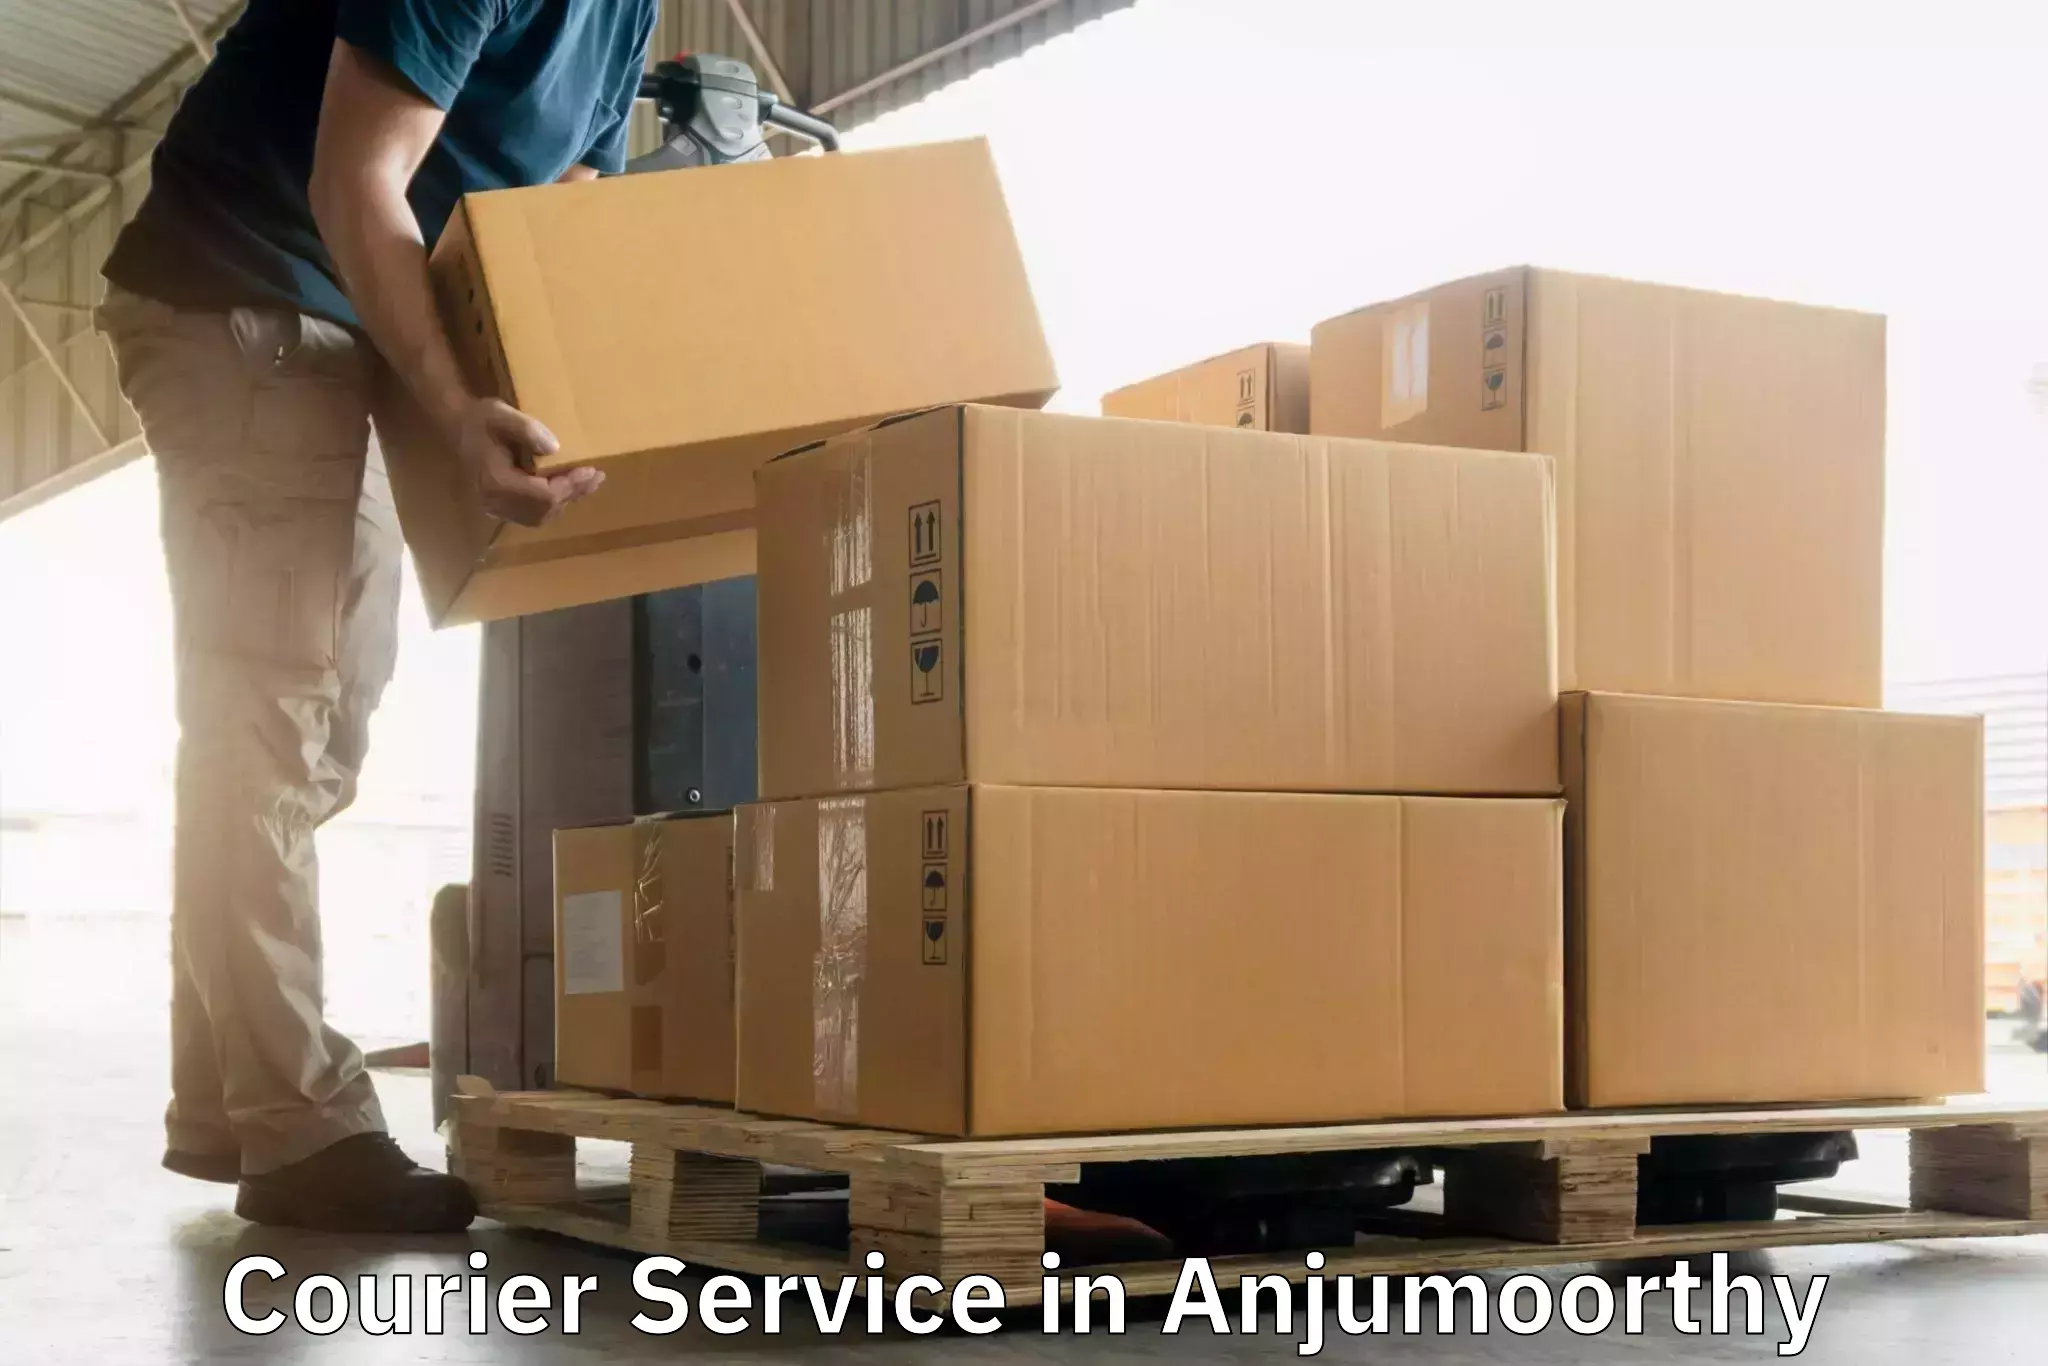 Integrated courier services in Anjumoorthy